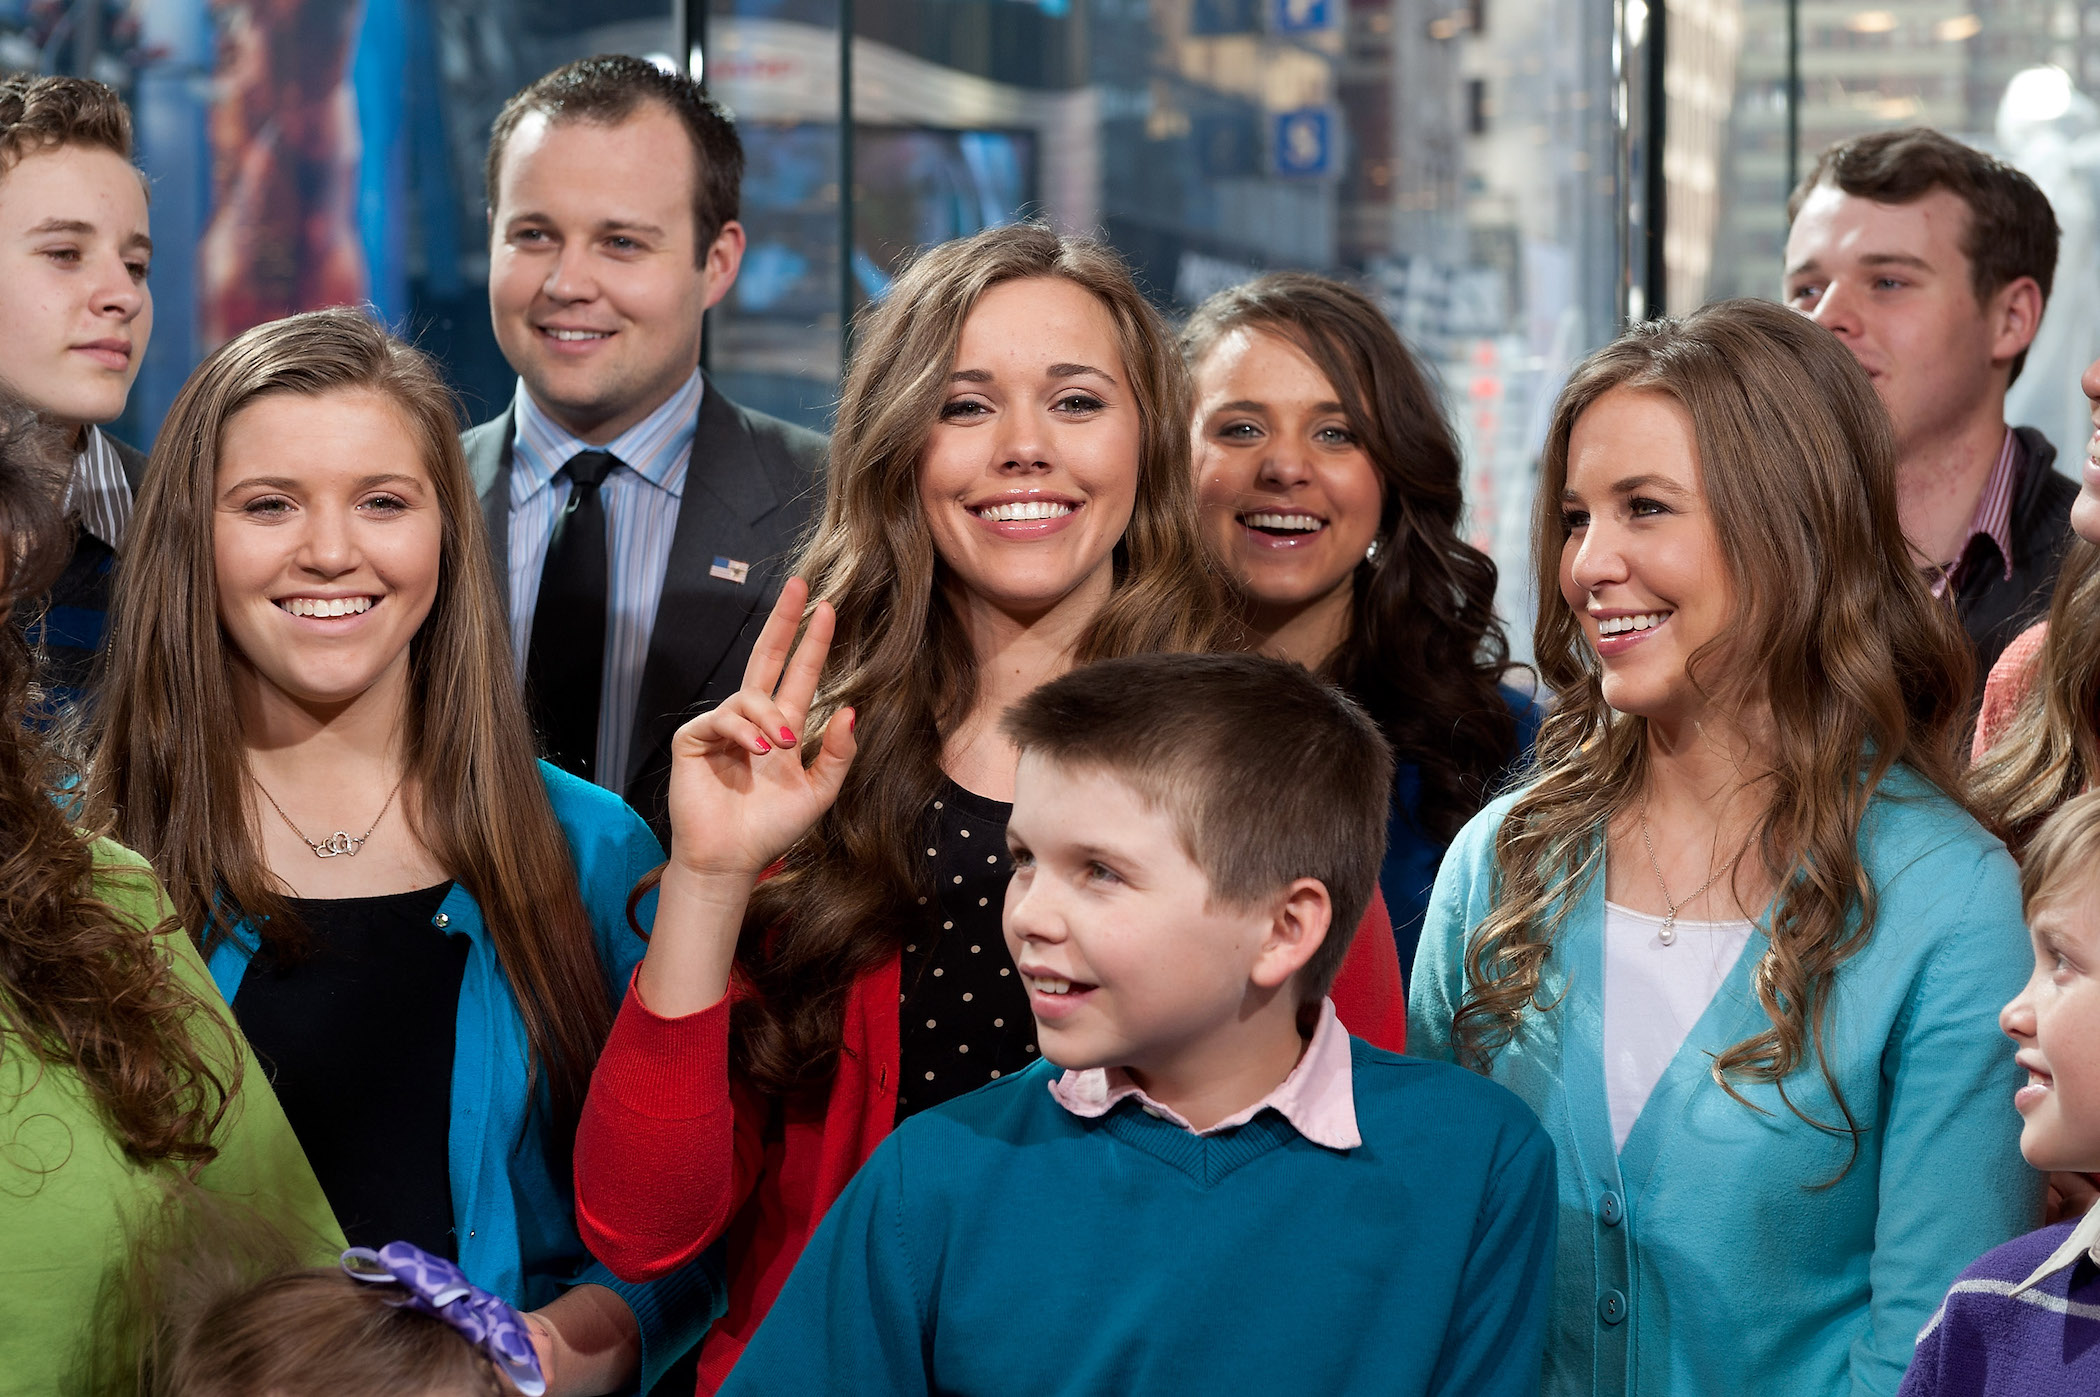 'Counting On' star Jessa Duggar surrounded by the rest of the Duggar family while on the set of 'Extra' 